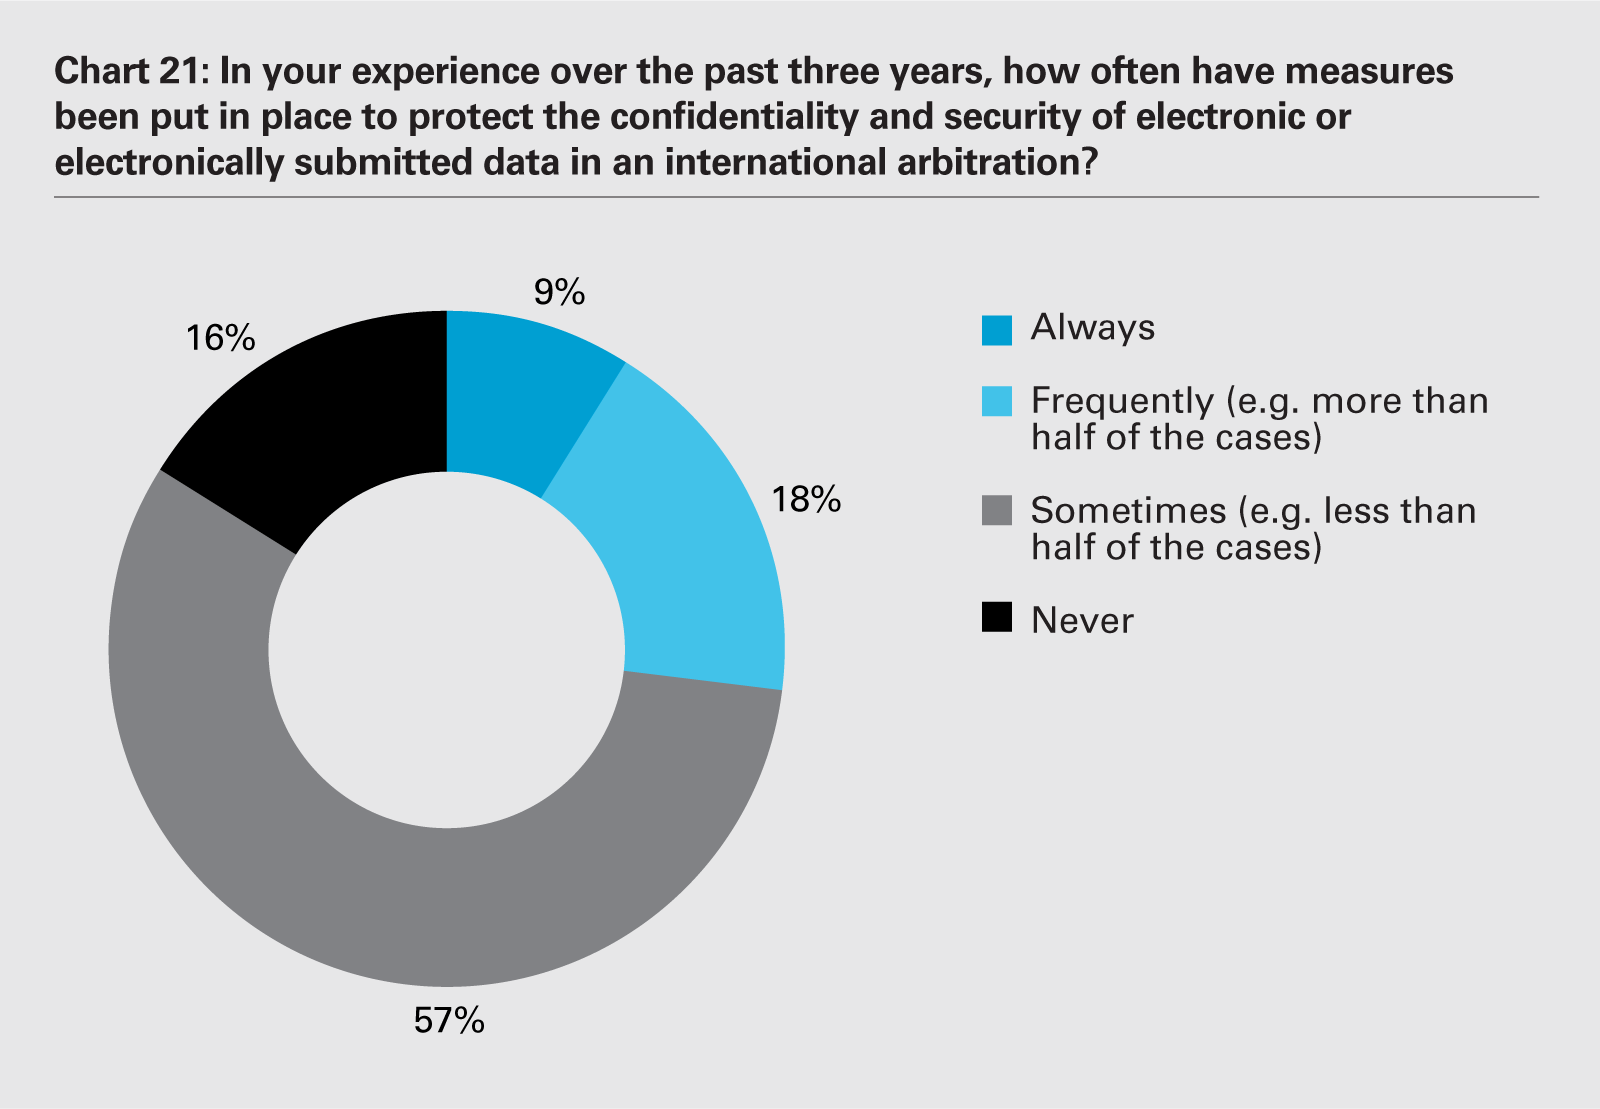 Chart 21: In your experience over the past three years, how often have measures been put in place to protect the confidentiality and security of electronic or electronically submitted data in an international arbitration? (PDF)